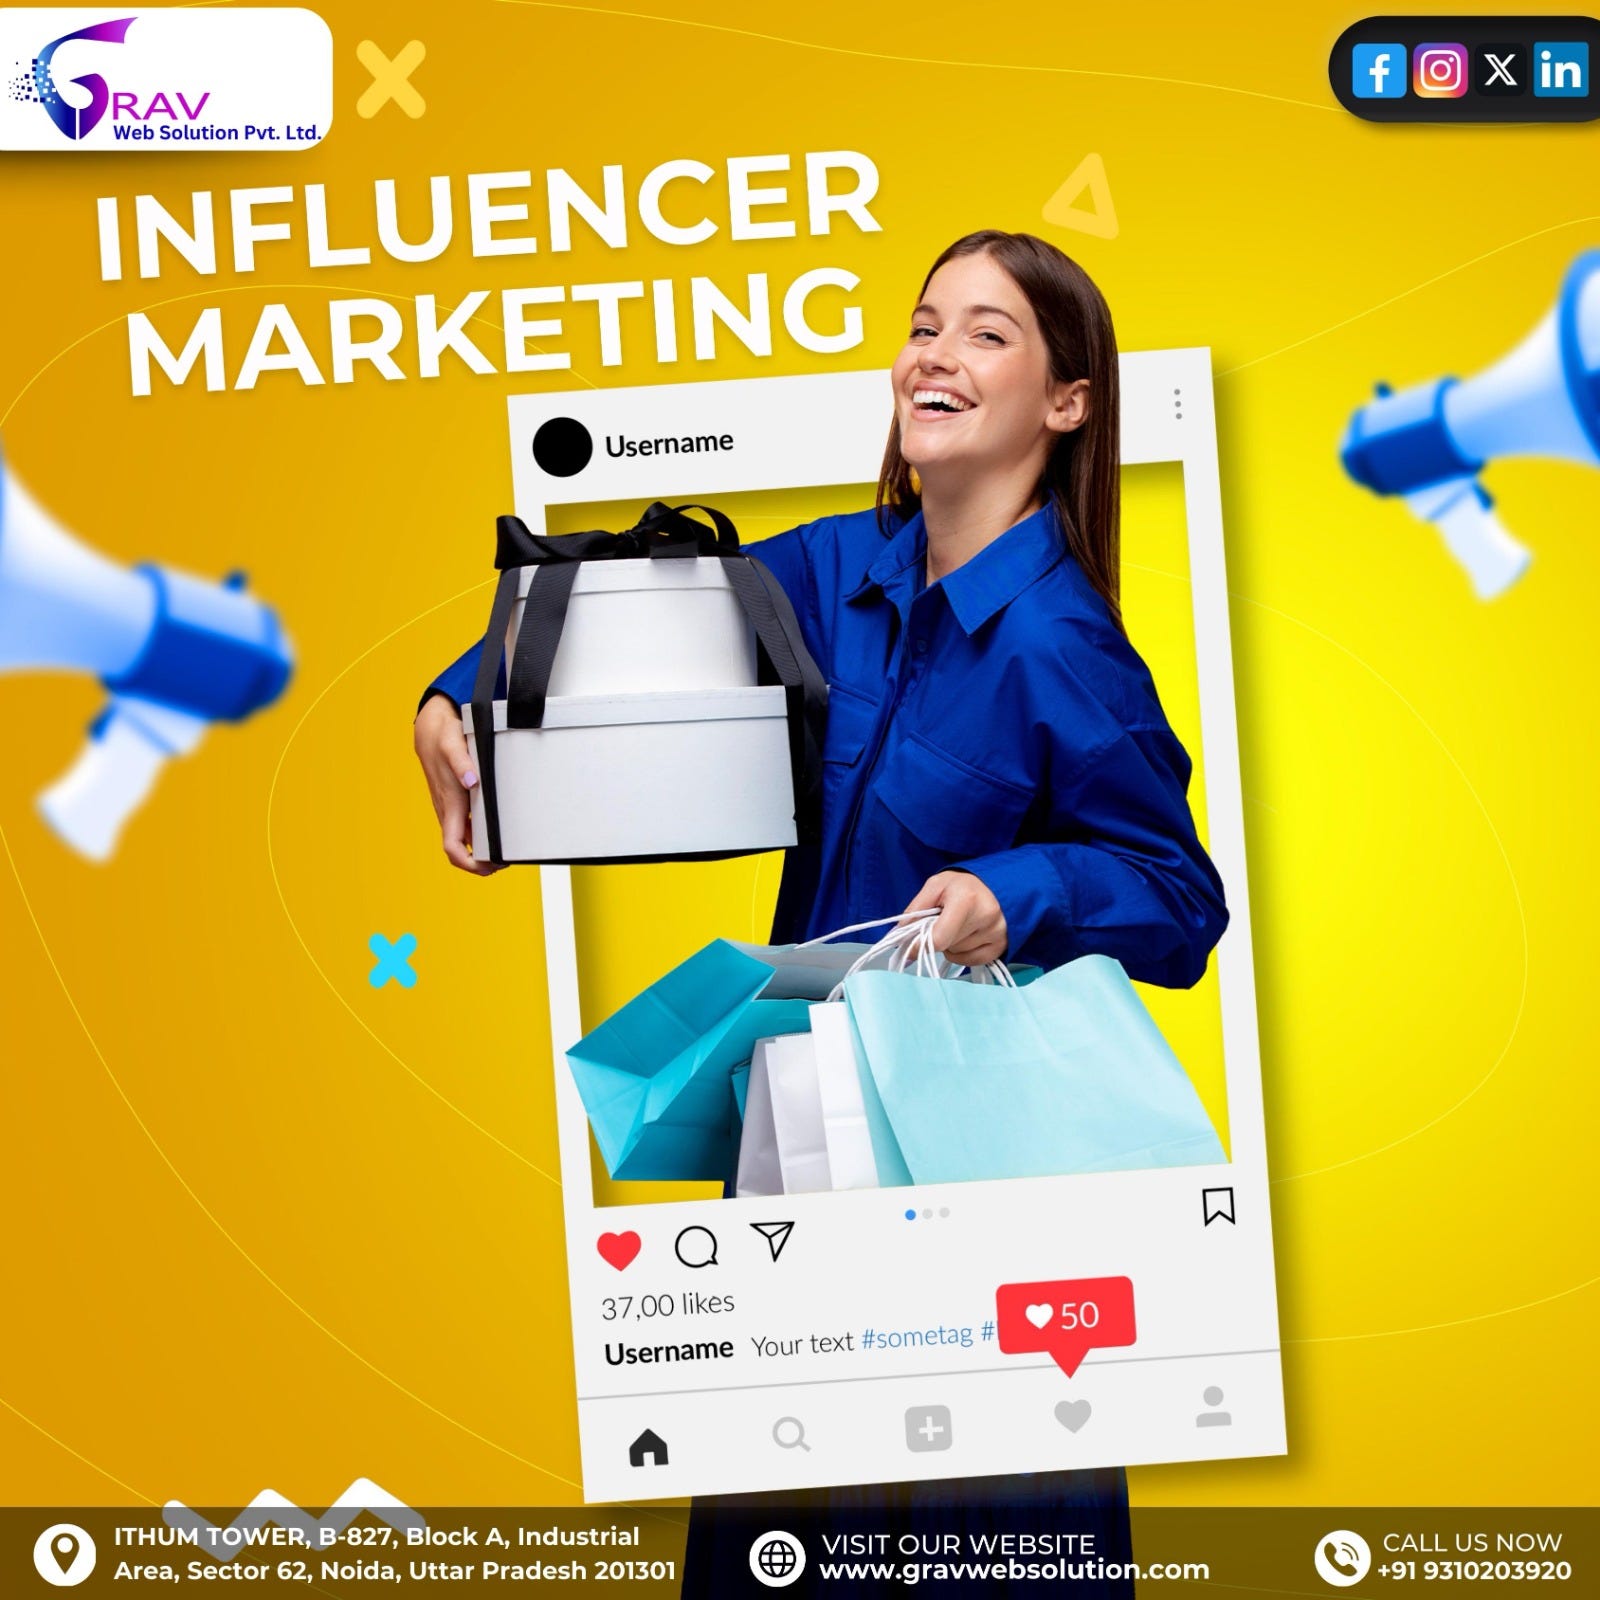 Amplify Your Brand Presence: Grav Web Solution — The Best Influencer Marketing Company in Noida